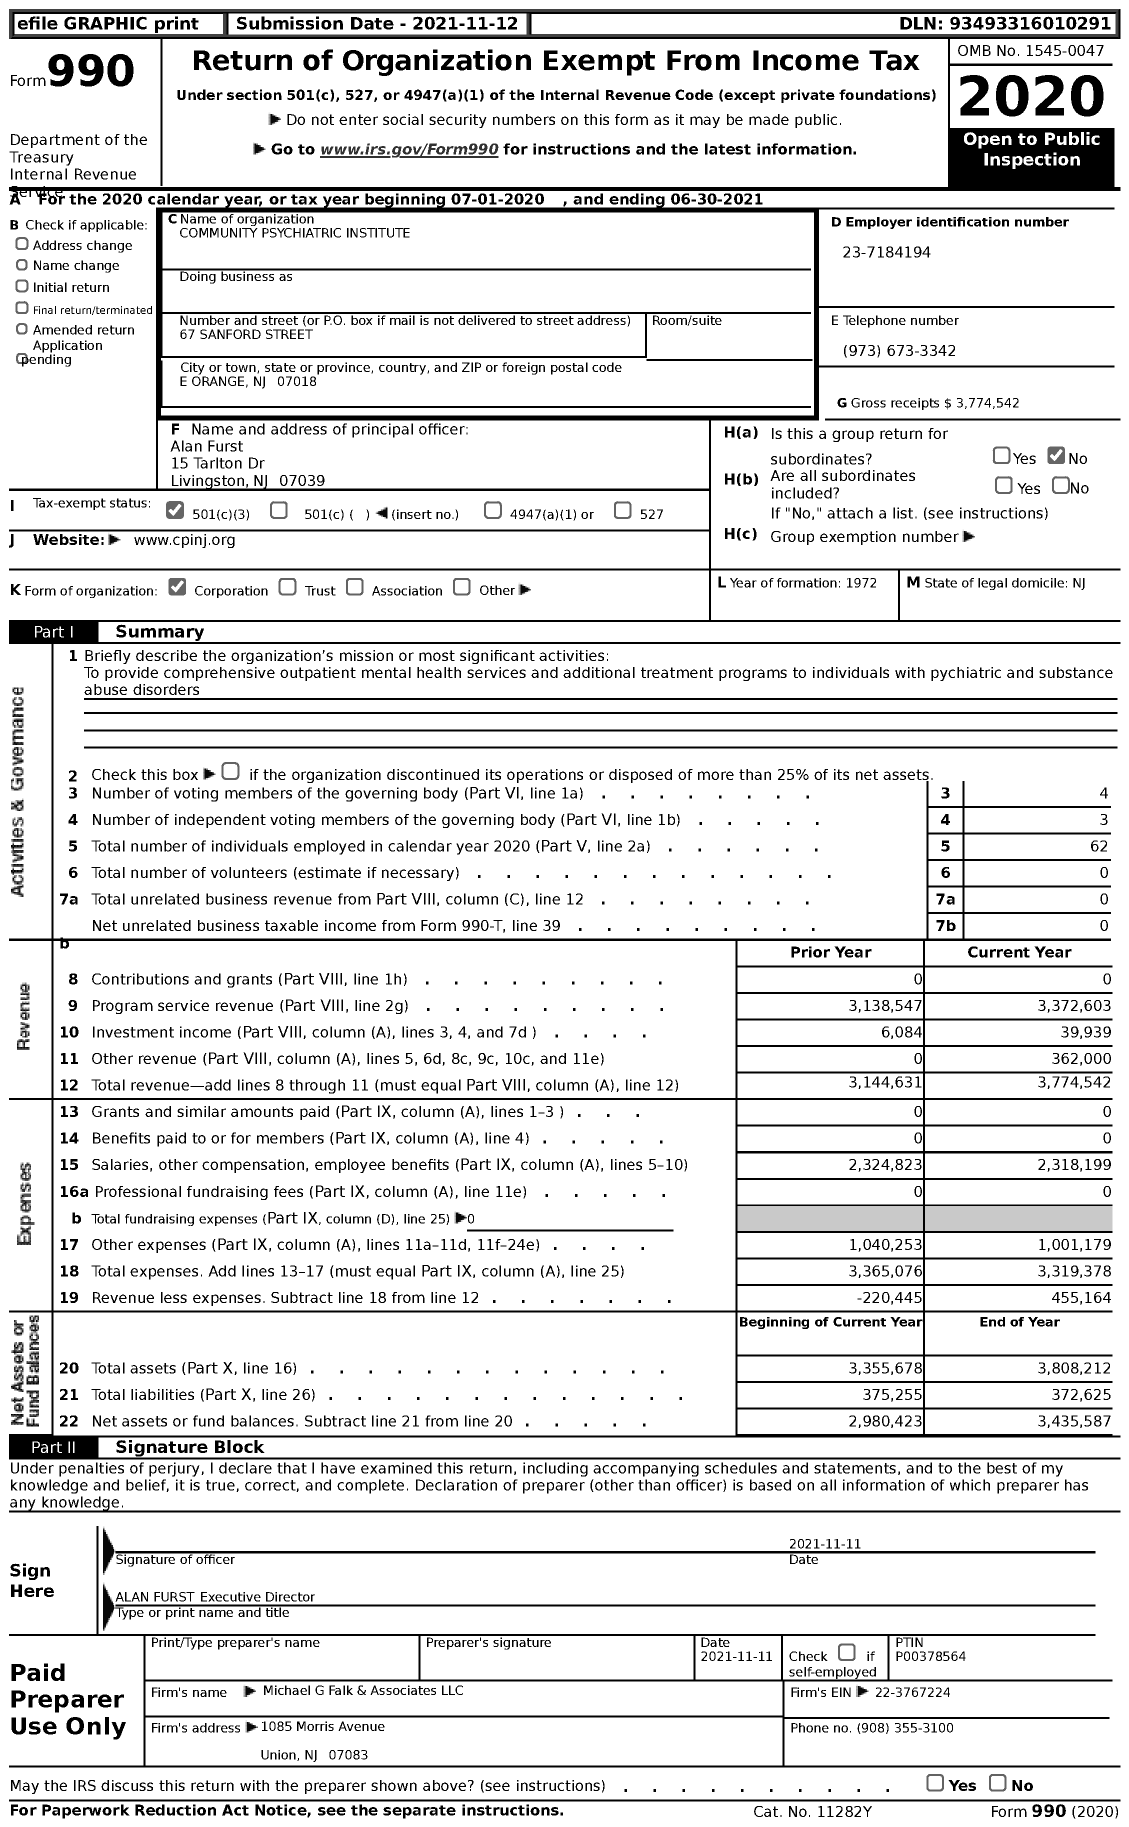 Image of first page of 2020 Form 990 for Community Psychiatric Institute (CPI)